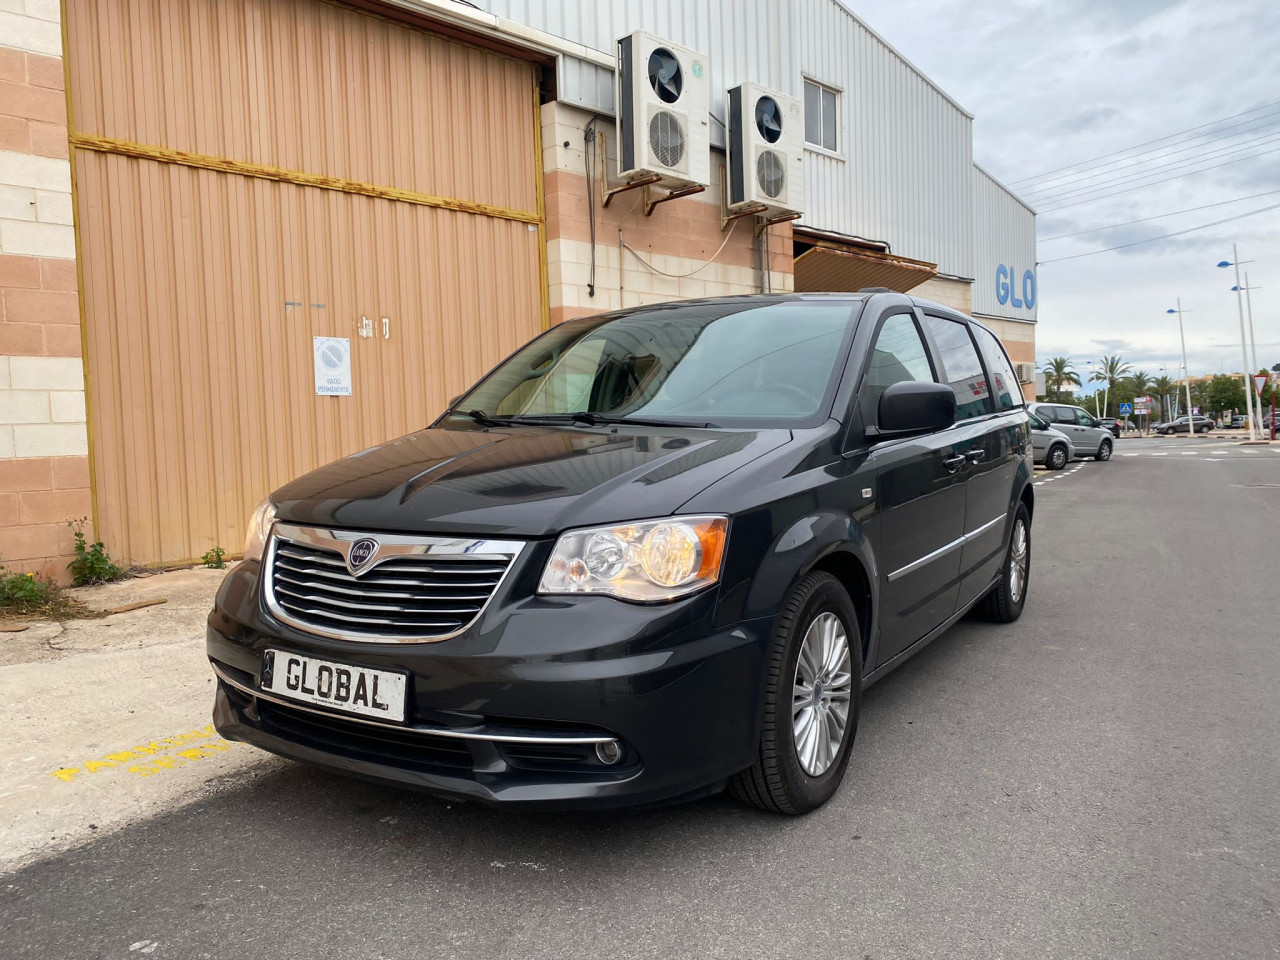 Lancia Grand Voyager 2.8 Crdi Gold Automatic People carrier Photo